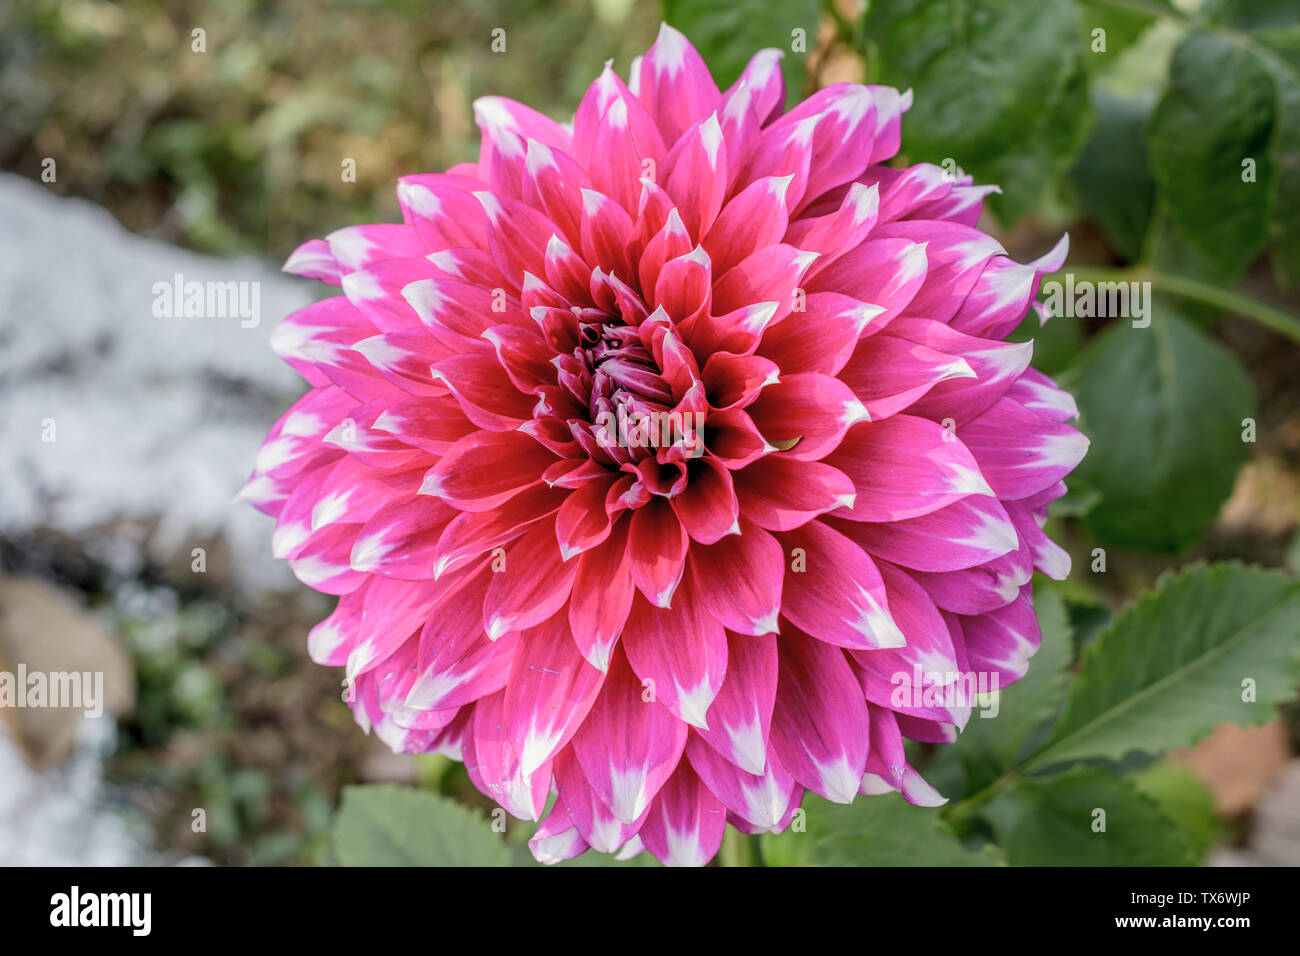 Chrysanthemum flowering plants in the family Asteraceae. It is a sun loving plant Blooms in early spring to late summer. A very popular flower for gar Stock Photo